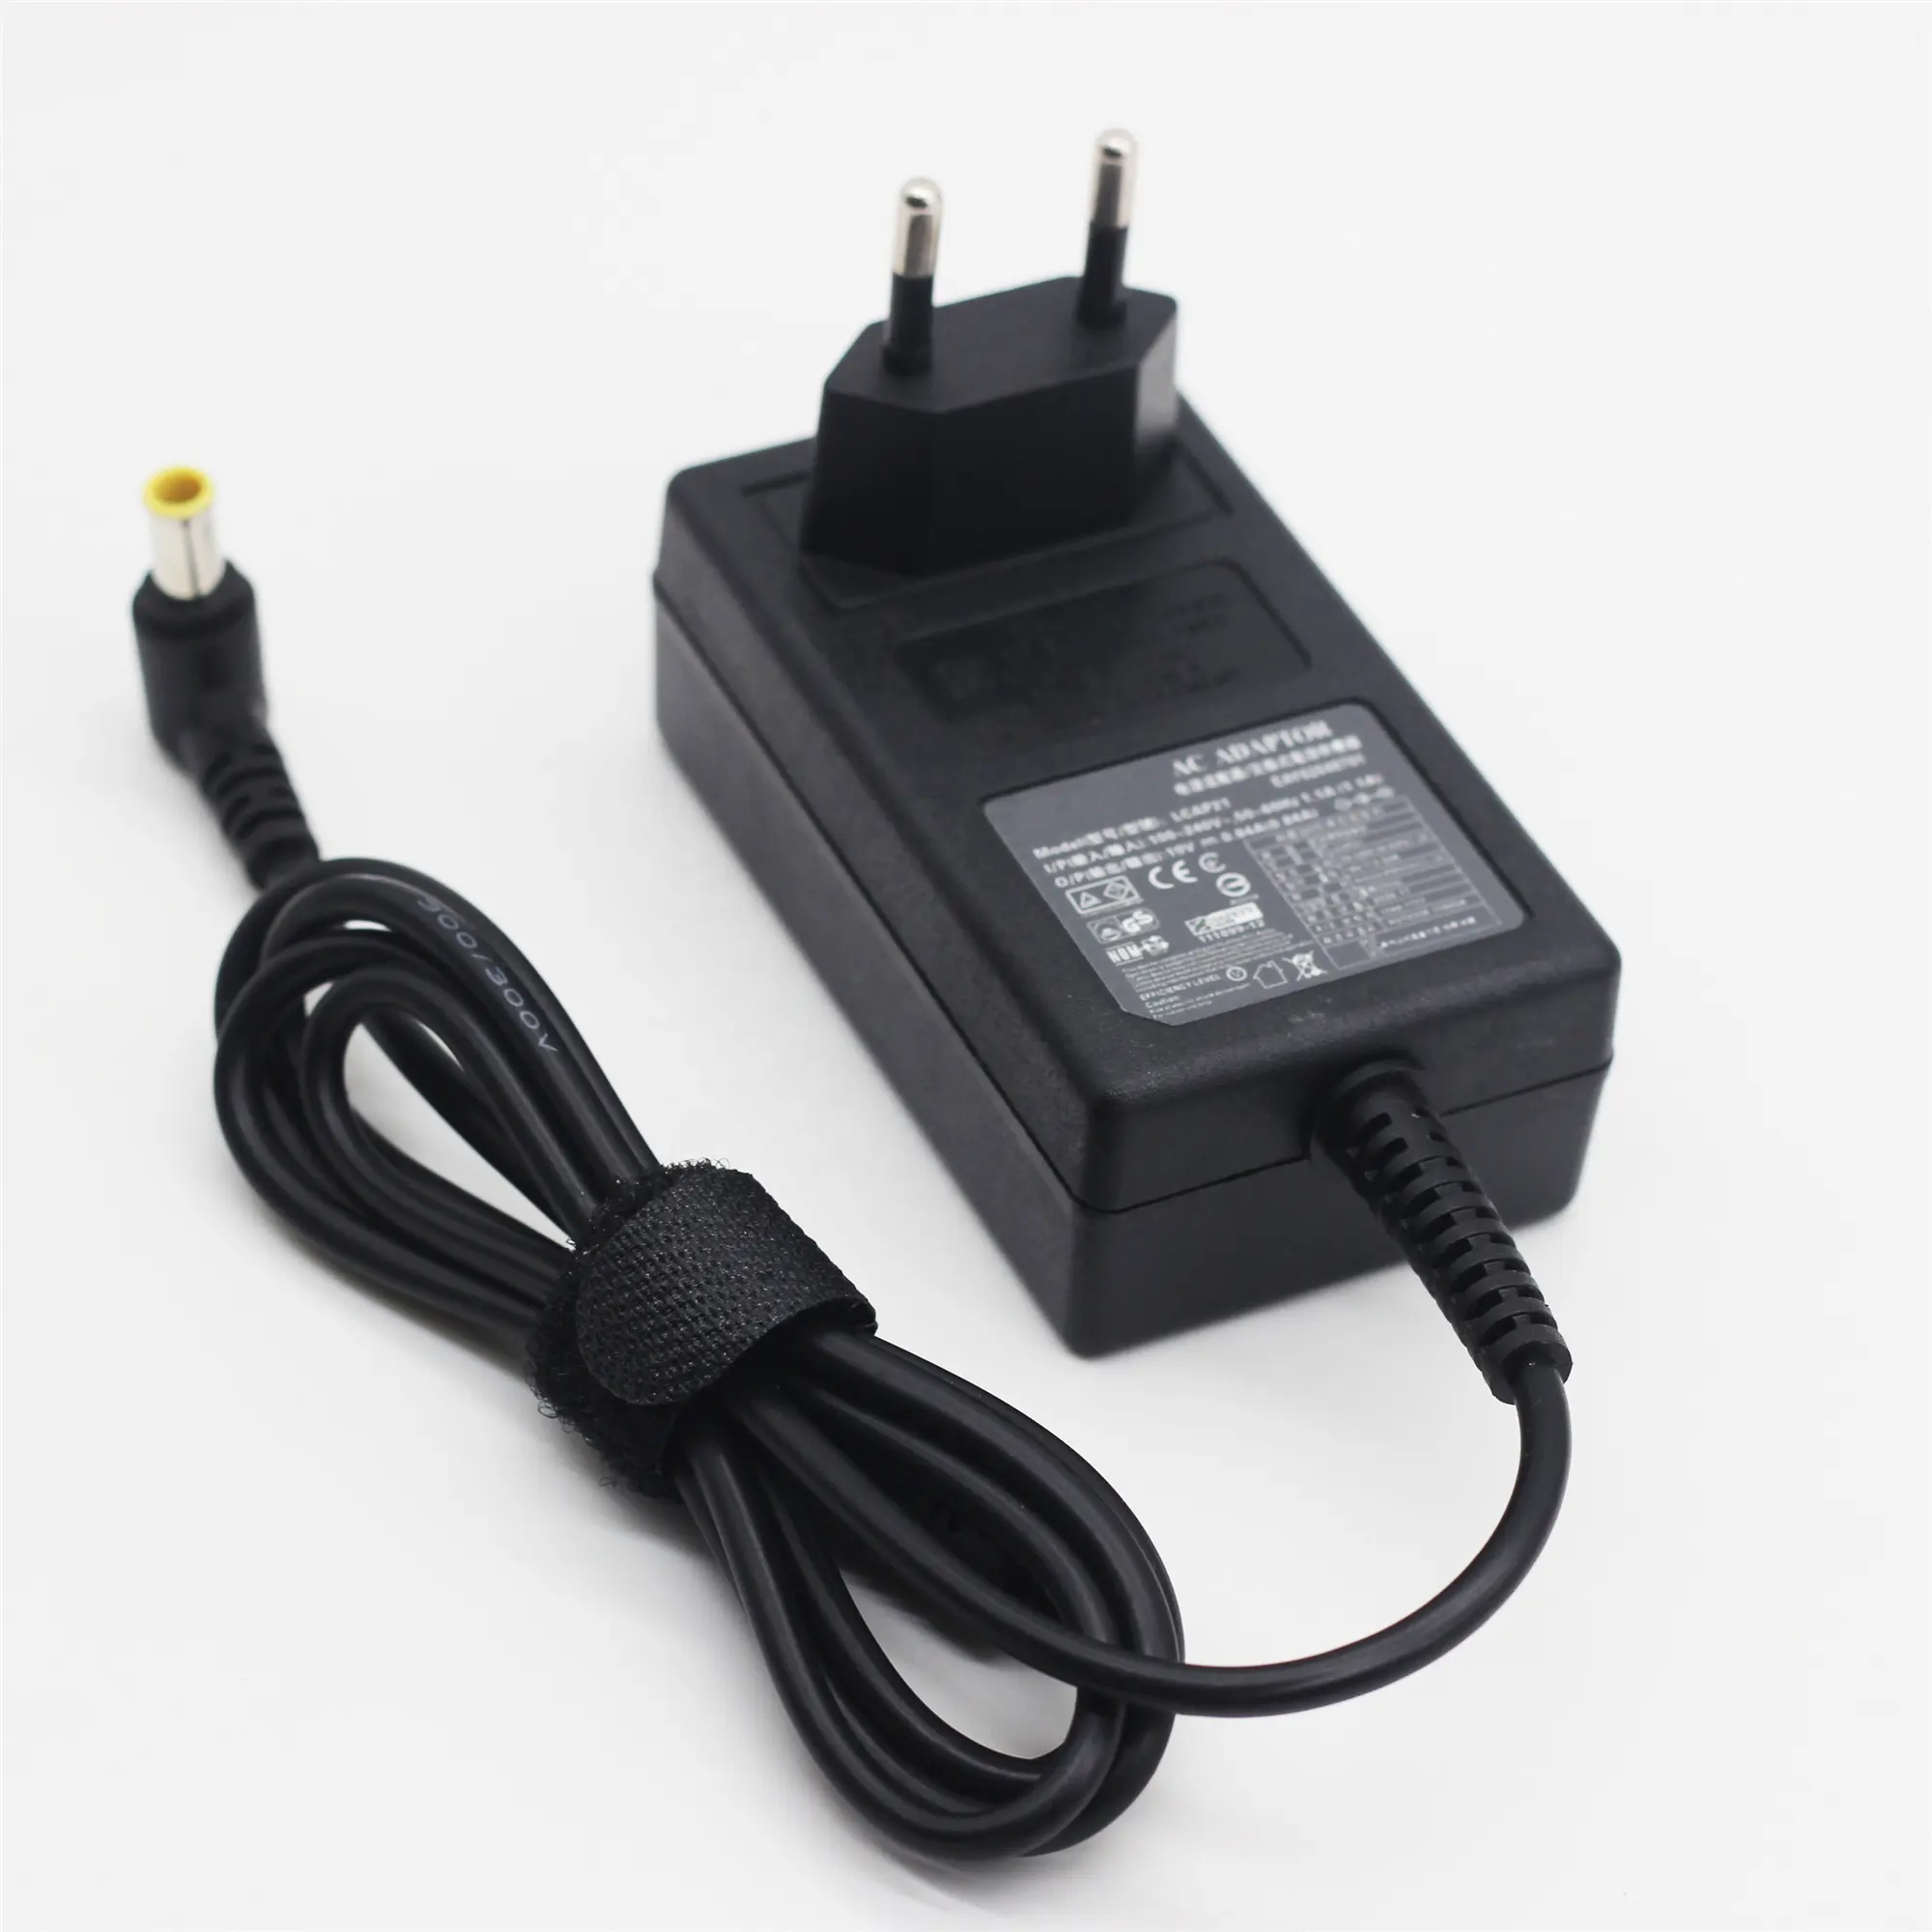 Laptop Power Adapter for LG Monitor Laptop AC Adapter Charger 16W 19V 0.84A 6.5*4.4mm